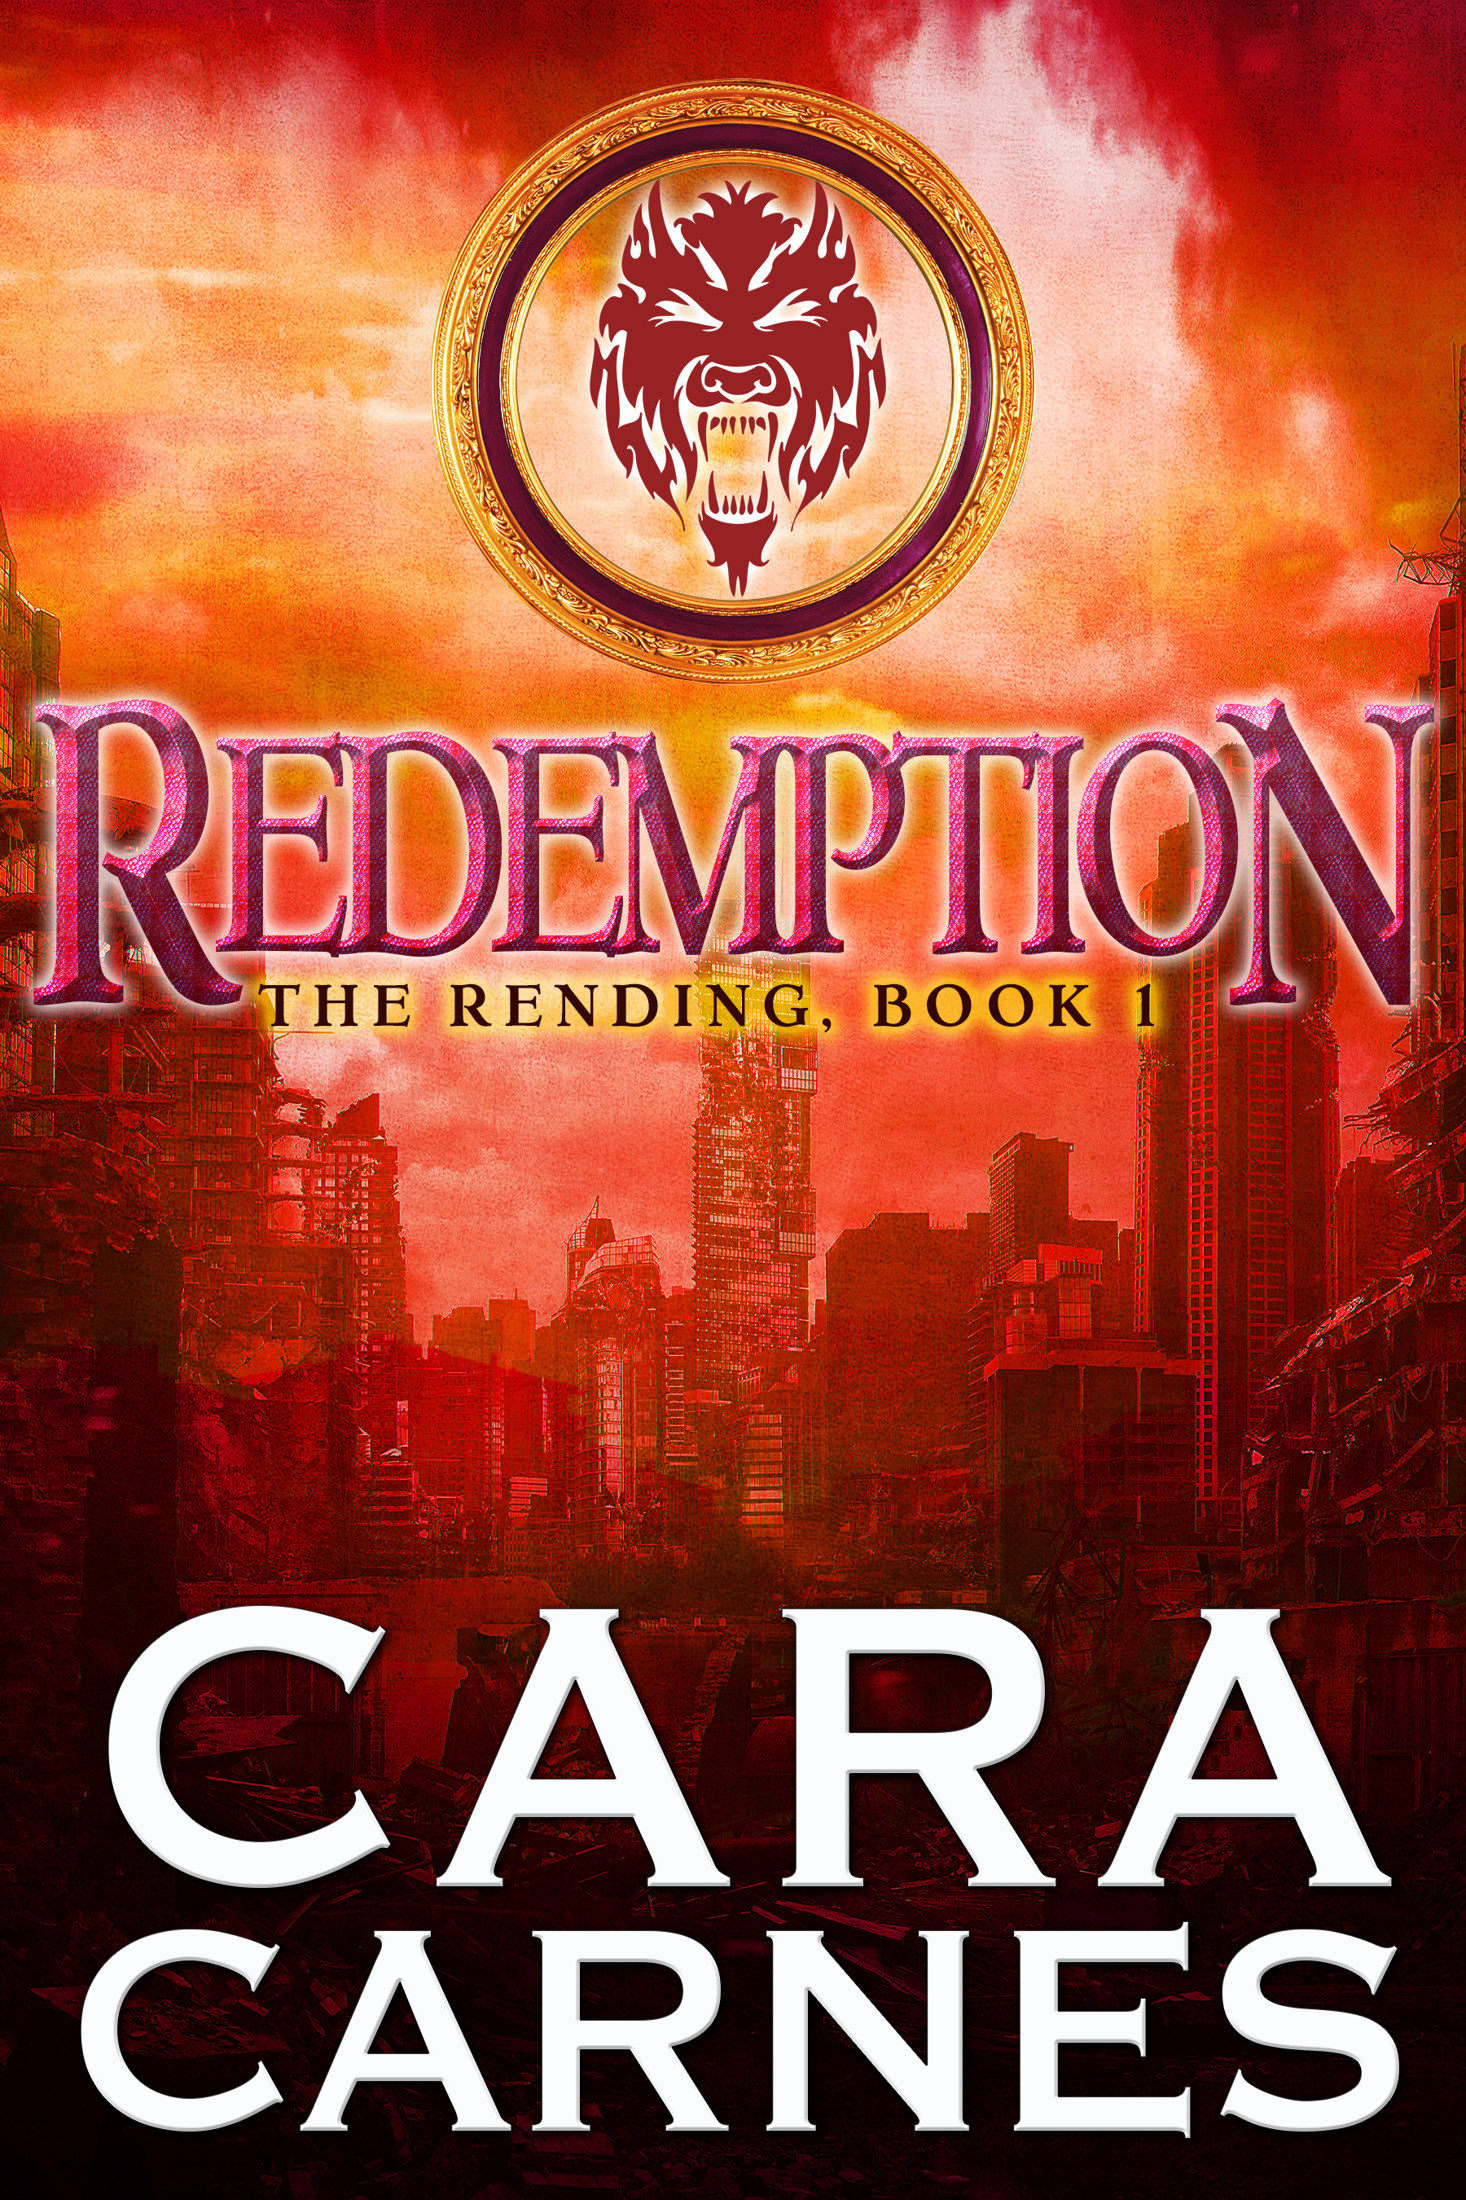 Redemption by Cara Carnes